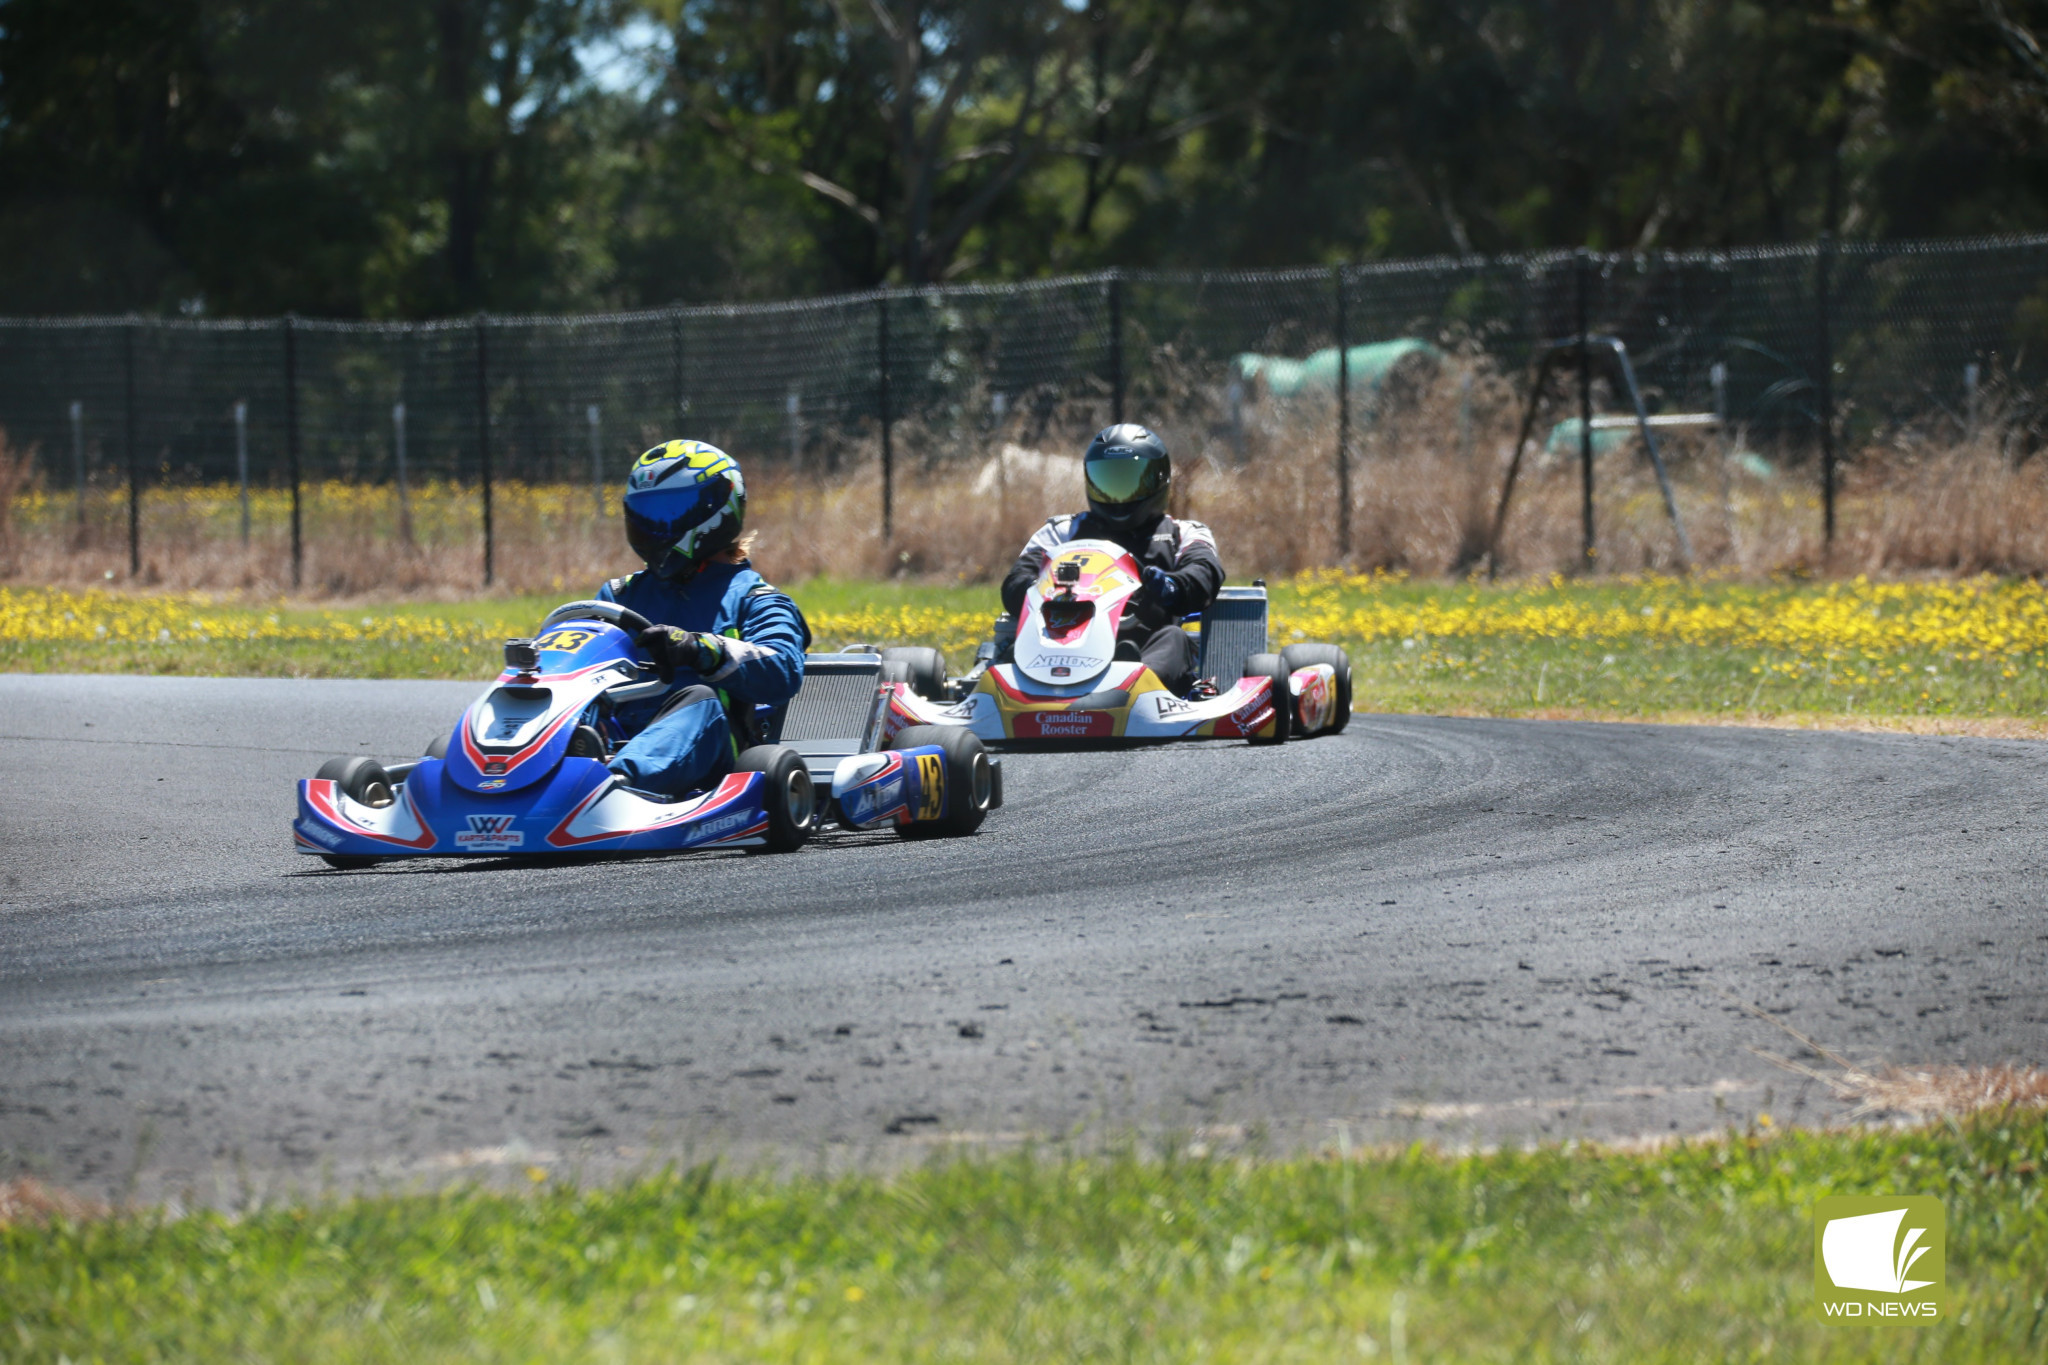 Go karts in action - feature photo